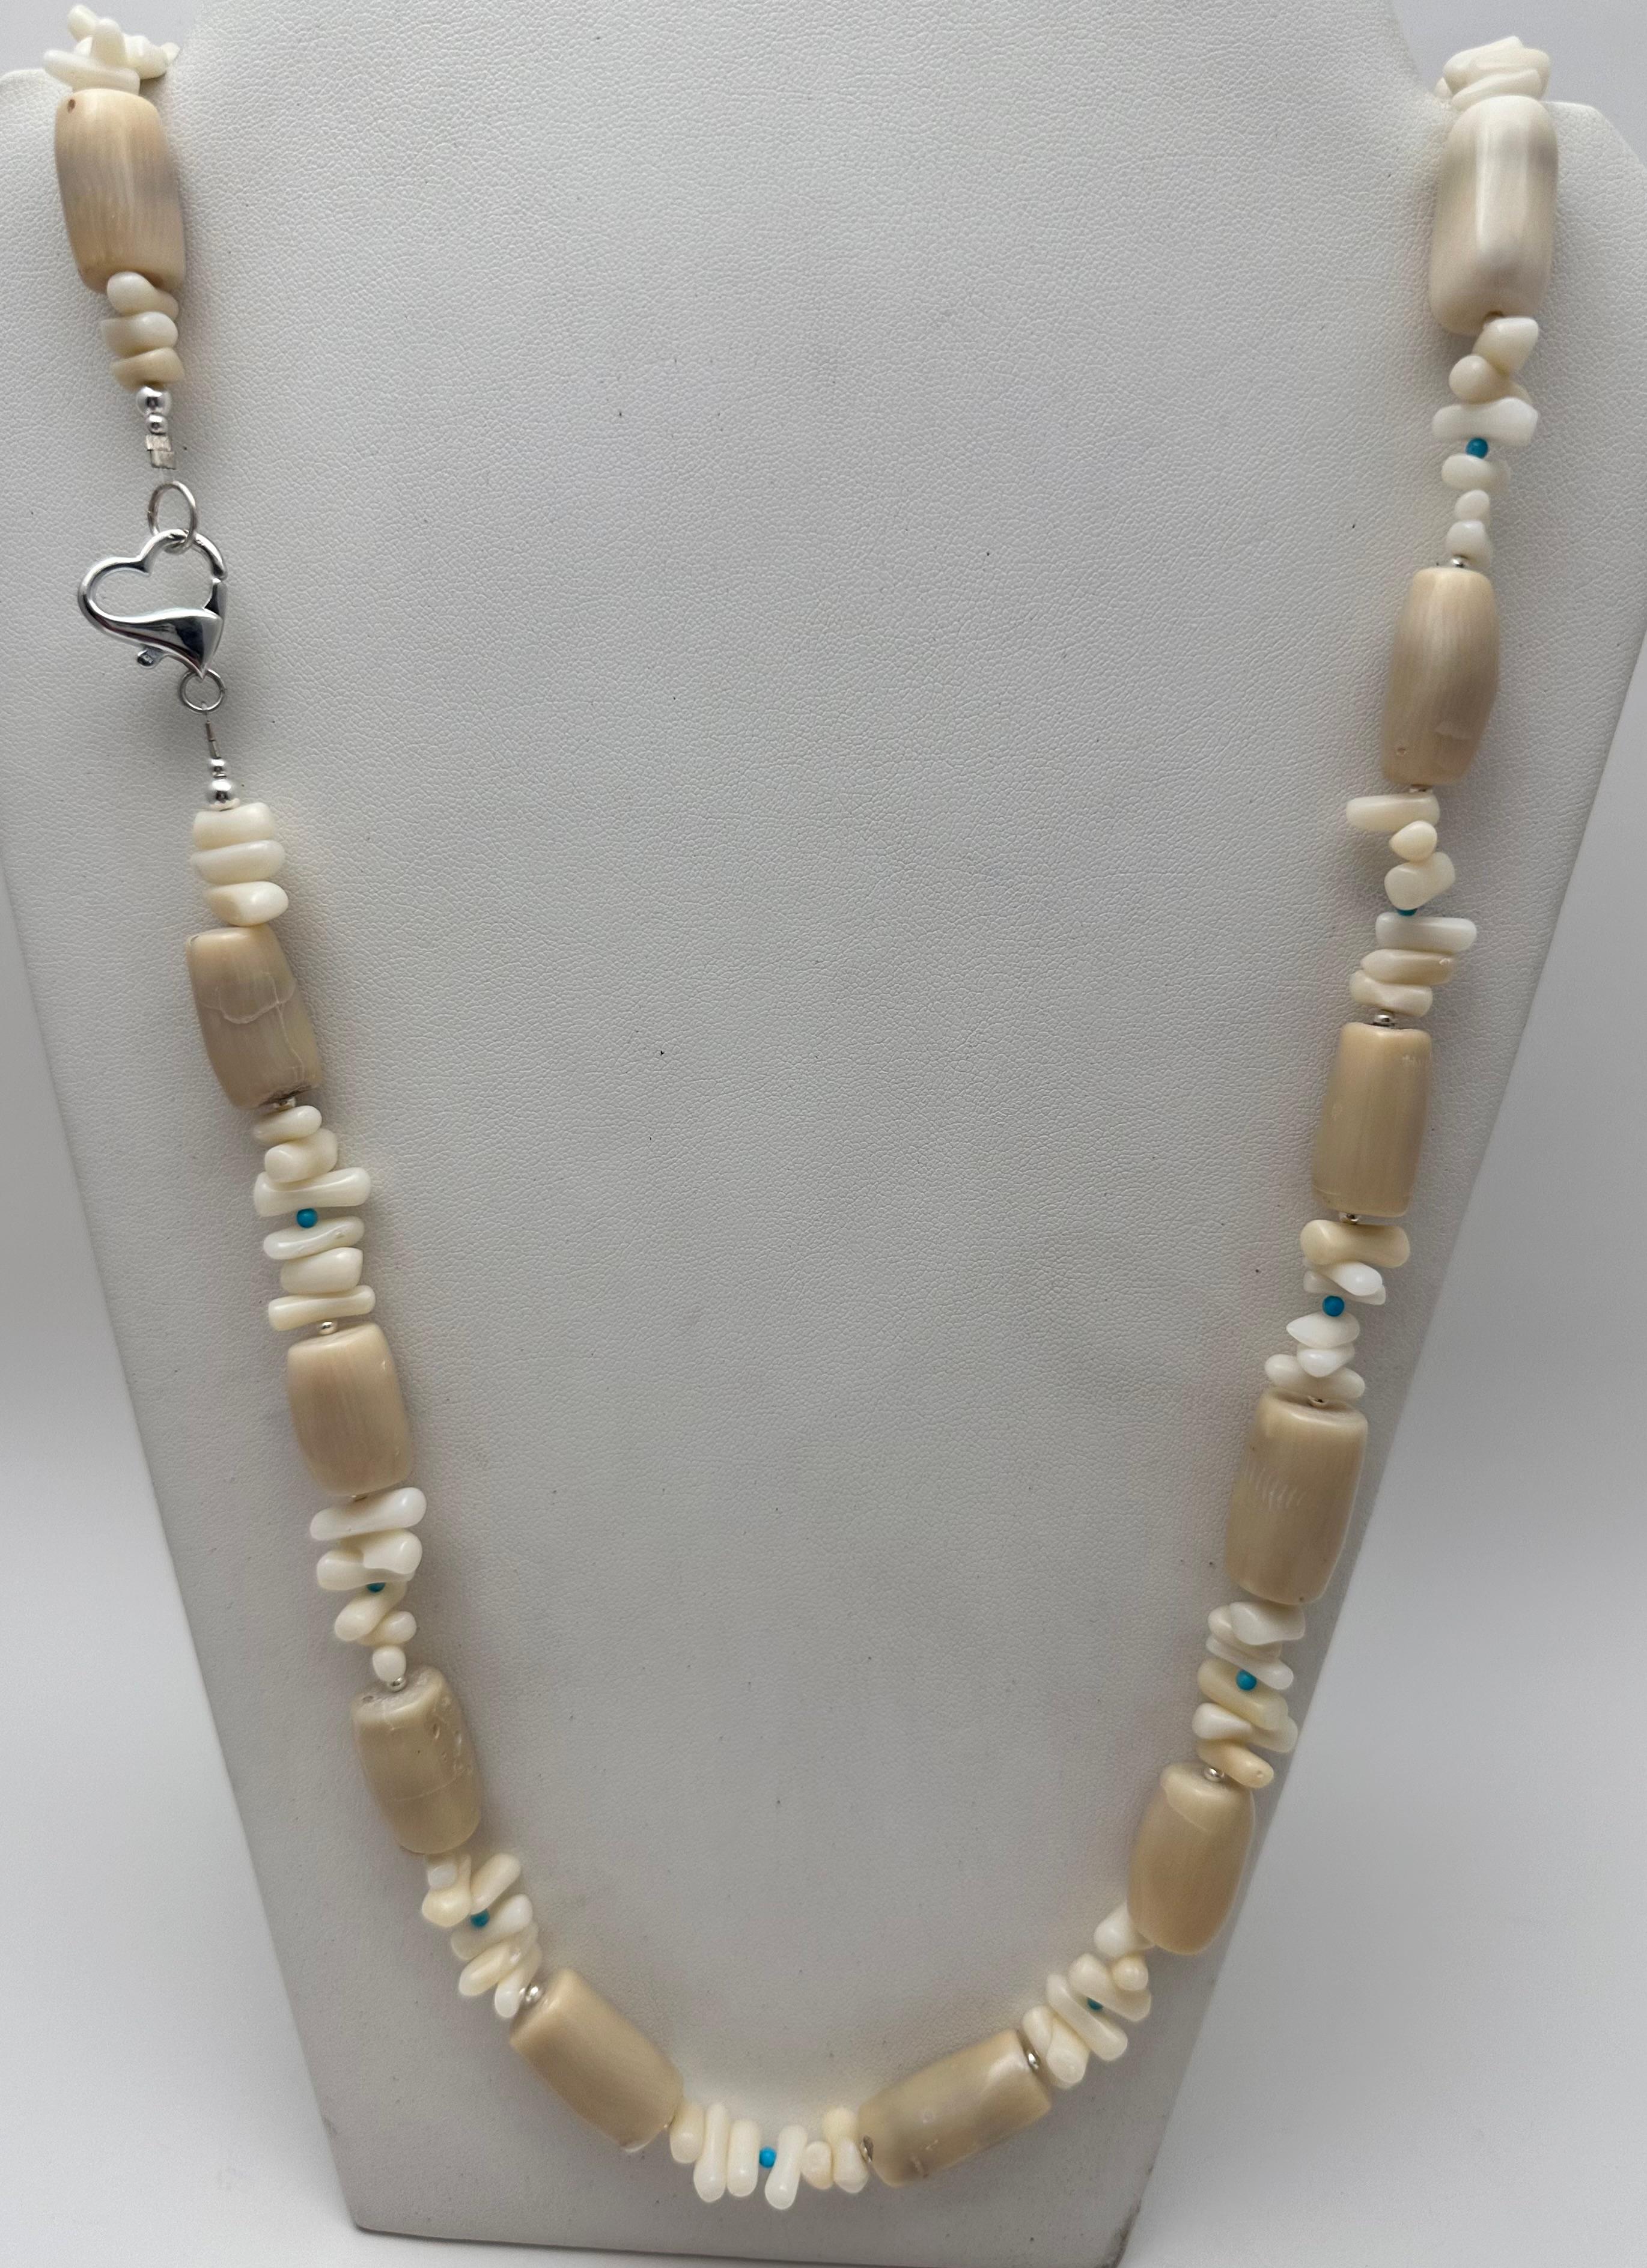 This stunning beaded necklace is a one-of-a-kind piece of handmade jewelry. Crafted from high-quality sterling silver .925, it features lovely beige barrel beads interwoven with coral and sleeping beauty turquoise stones.  The necklace fastens with